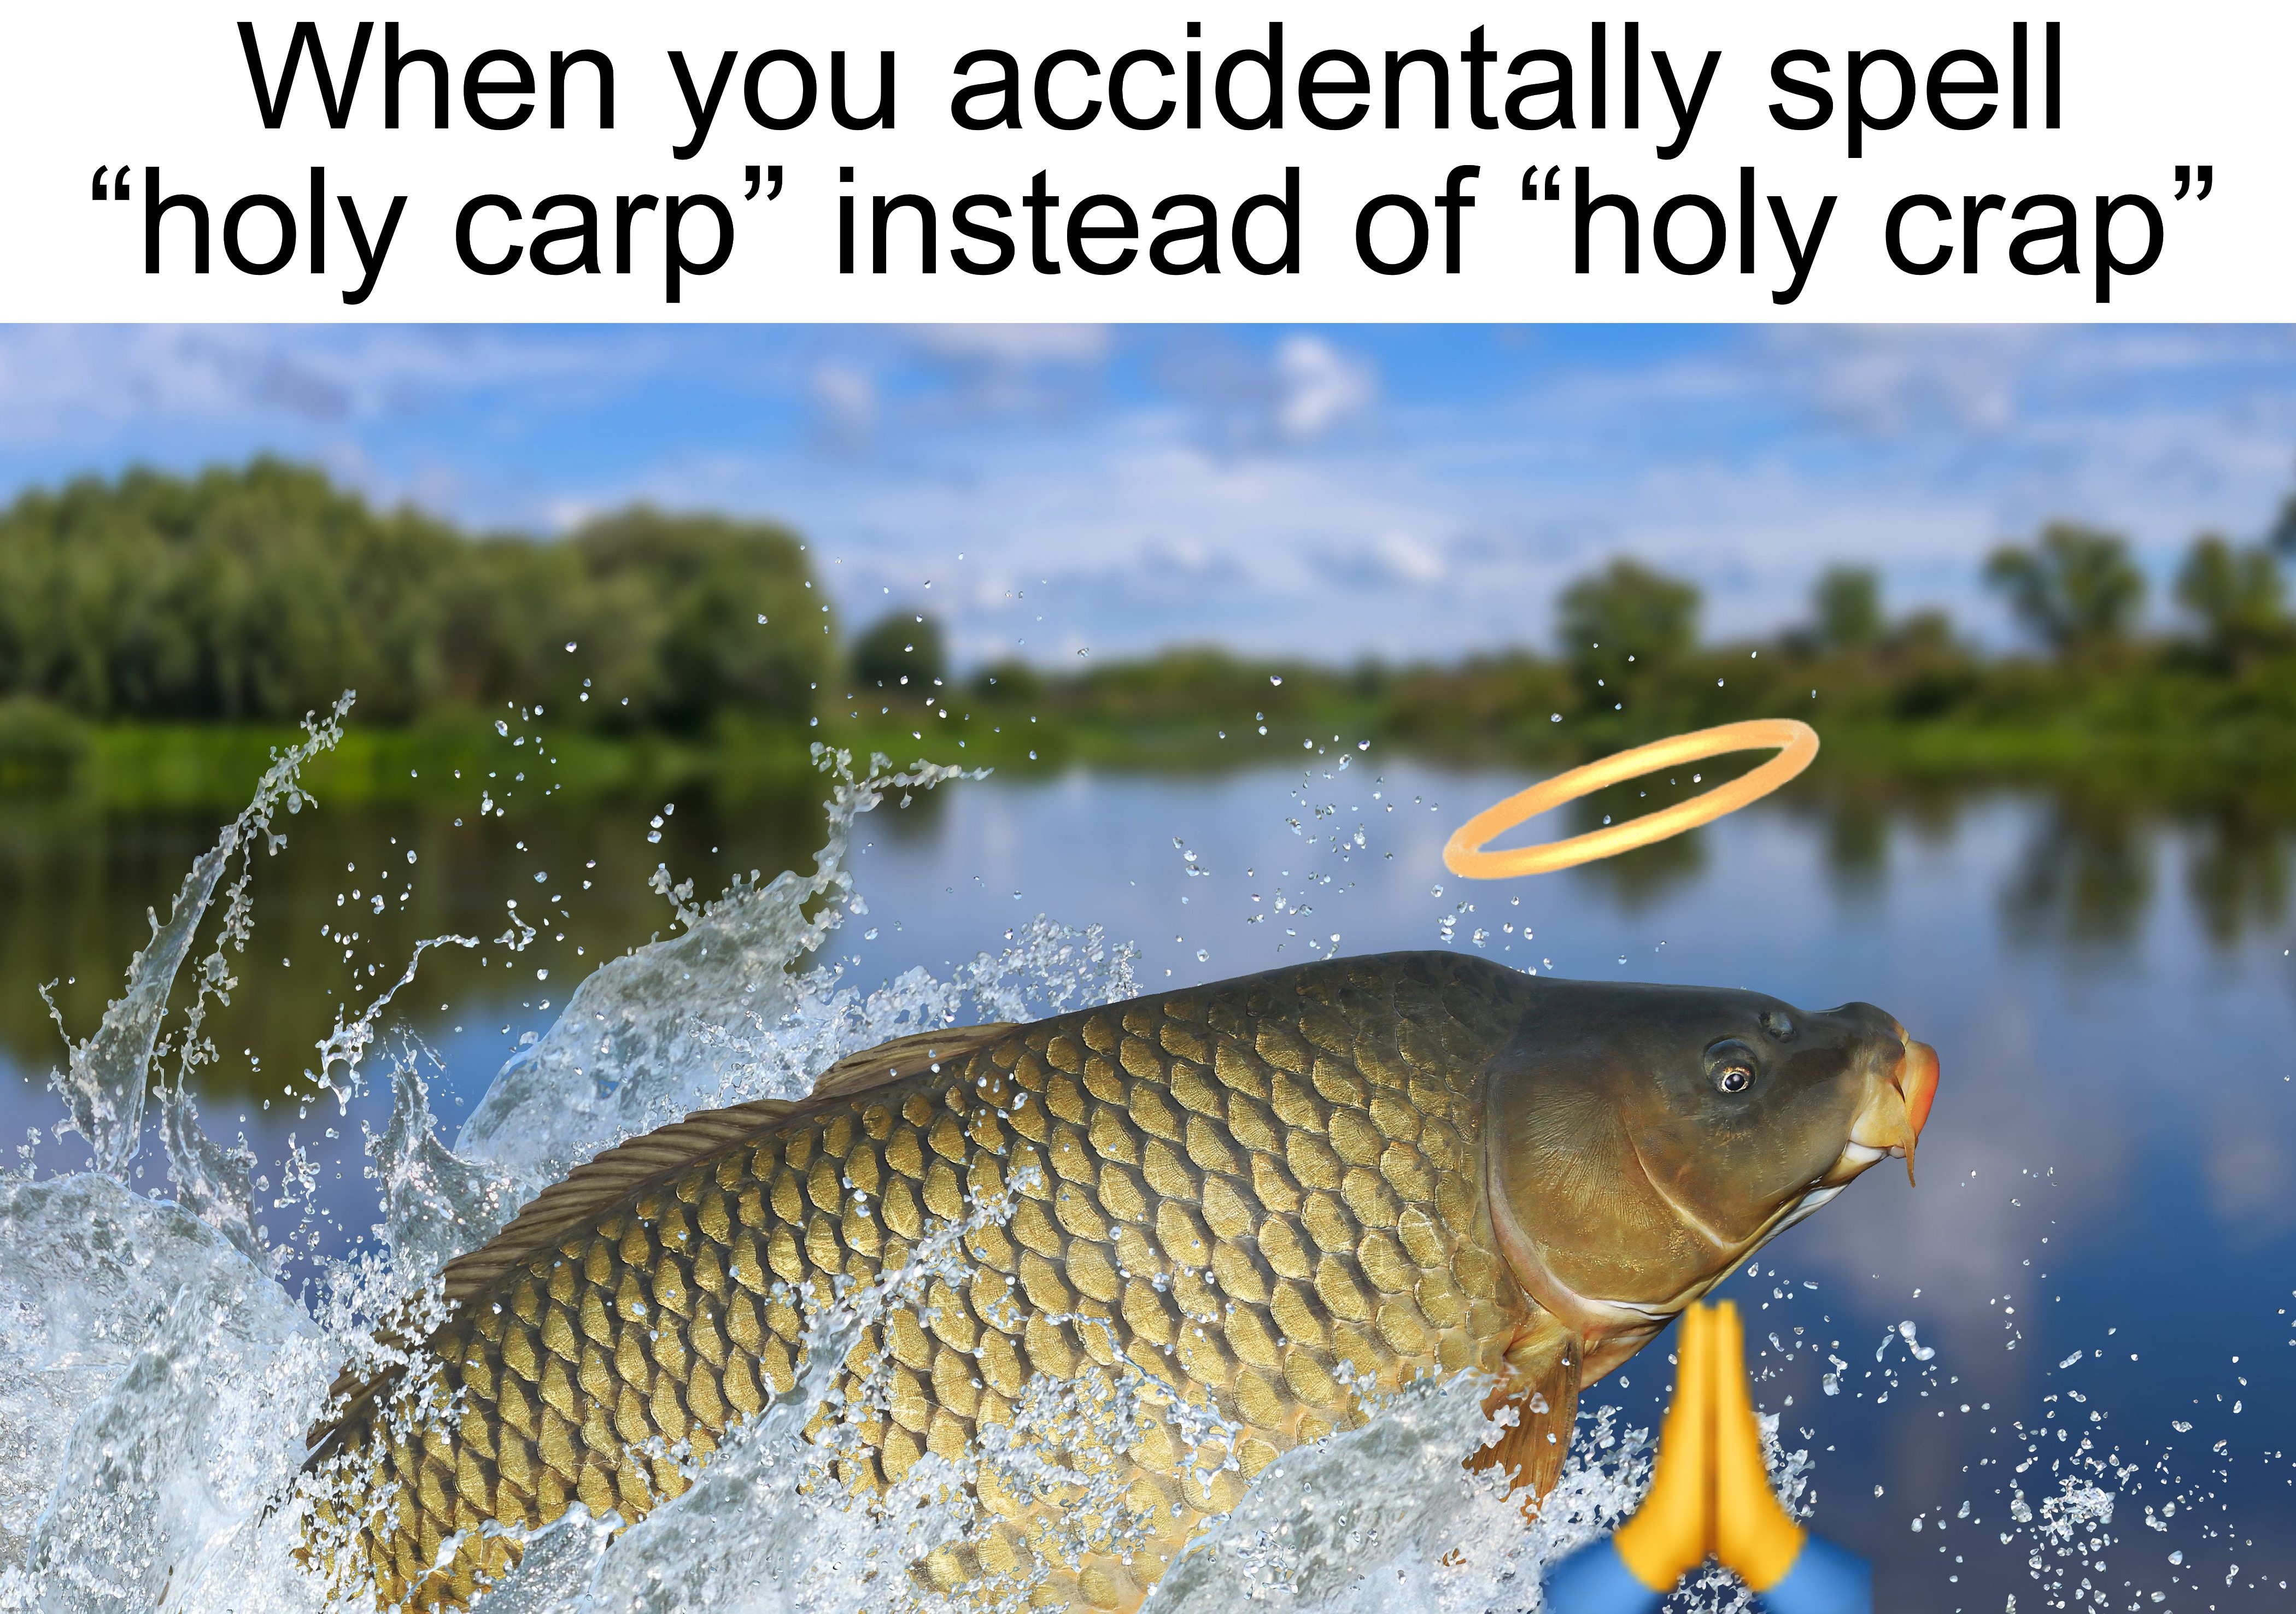 Holy carp! | When you accidentally spell “holy carp” instead of “holy crap” | image tagged in memes,funny,fish,holy,woah,wait what | made w/ Imgflip meme maker